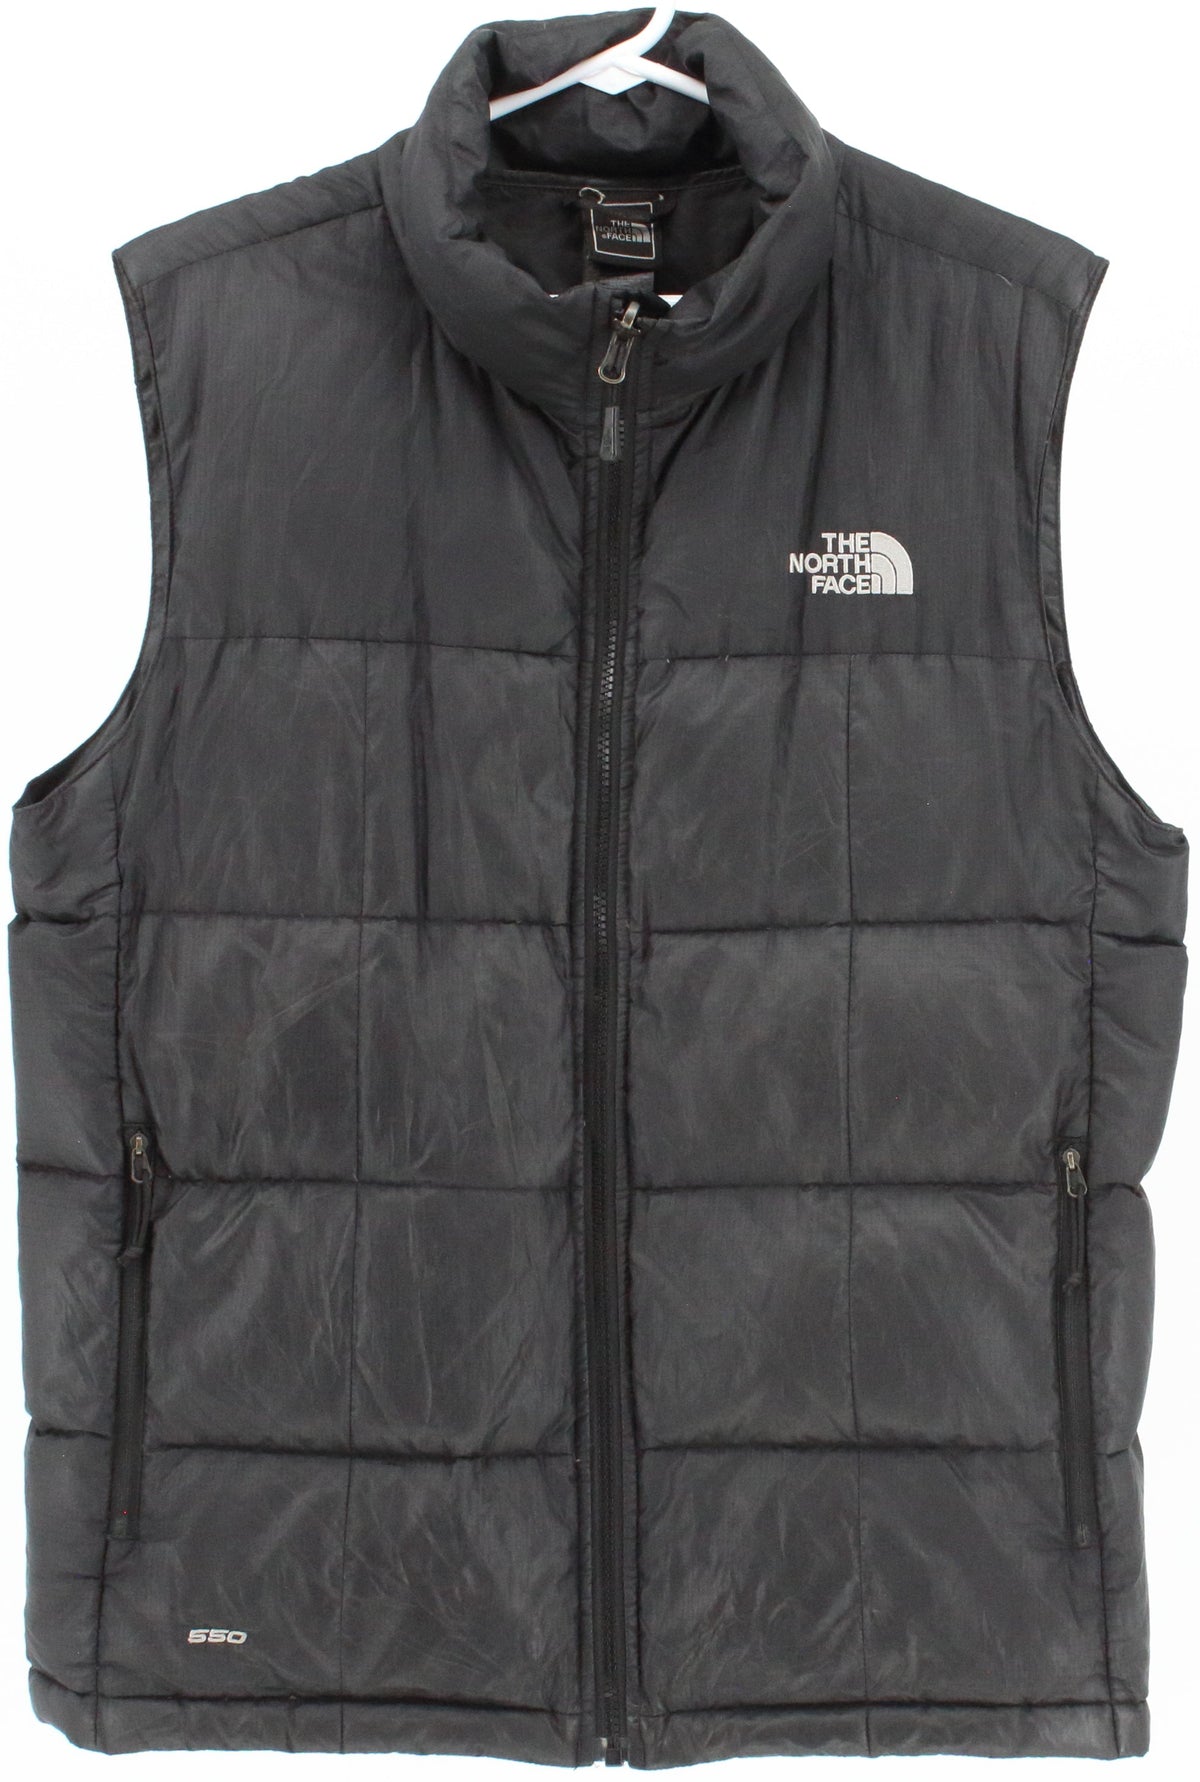 The North Face 550 Black Insulated Men's Vest